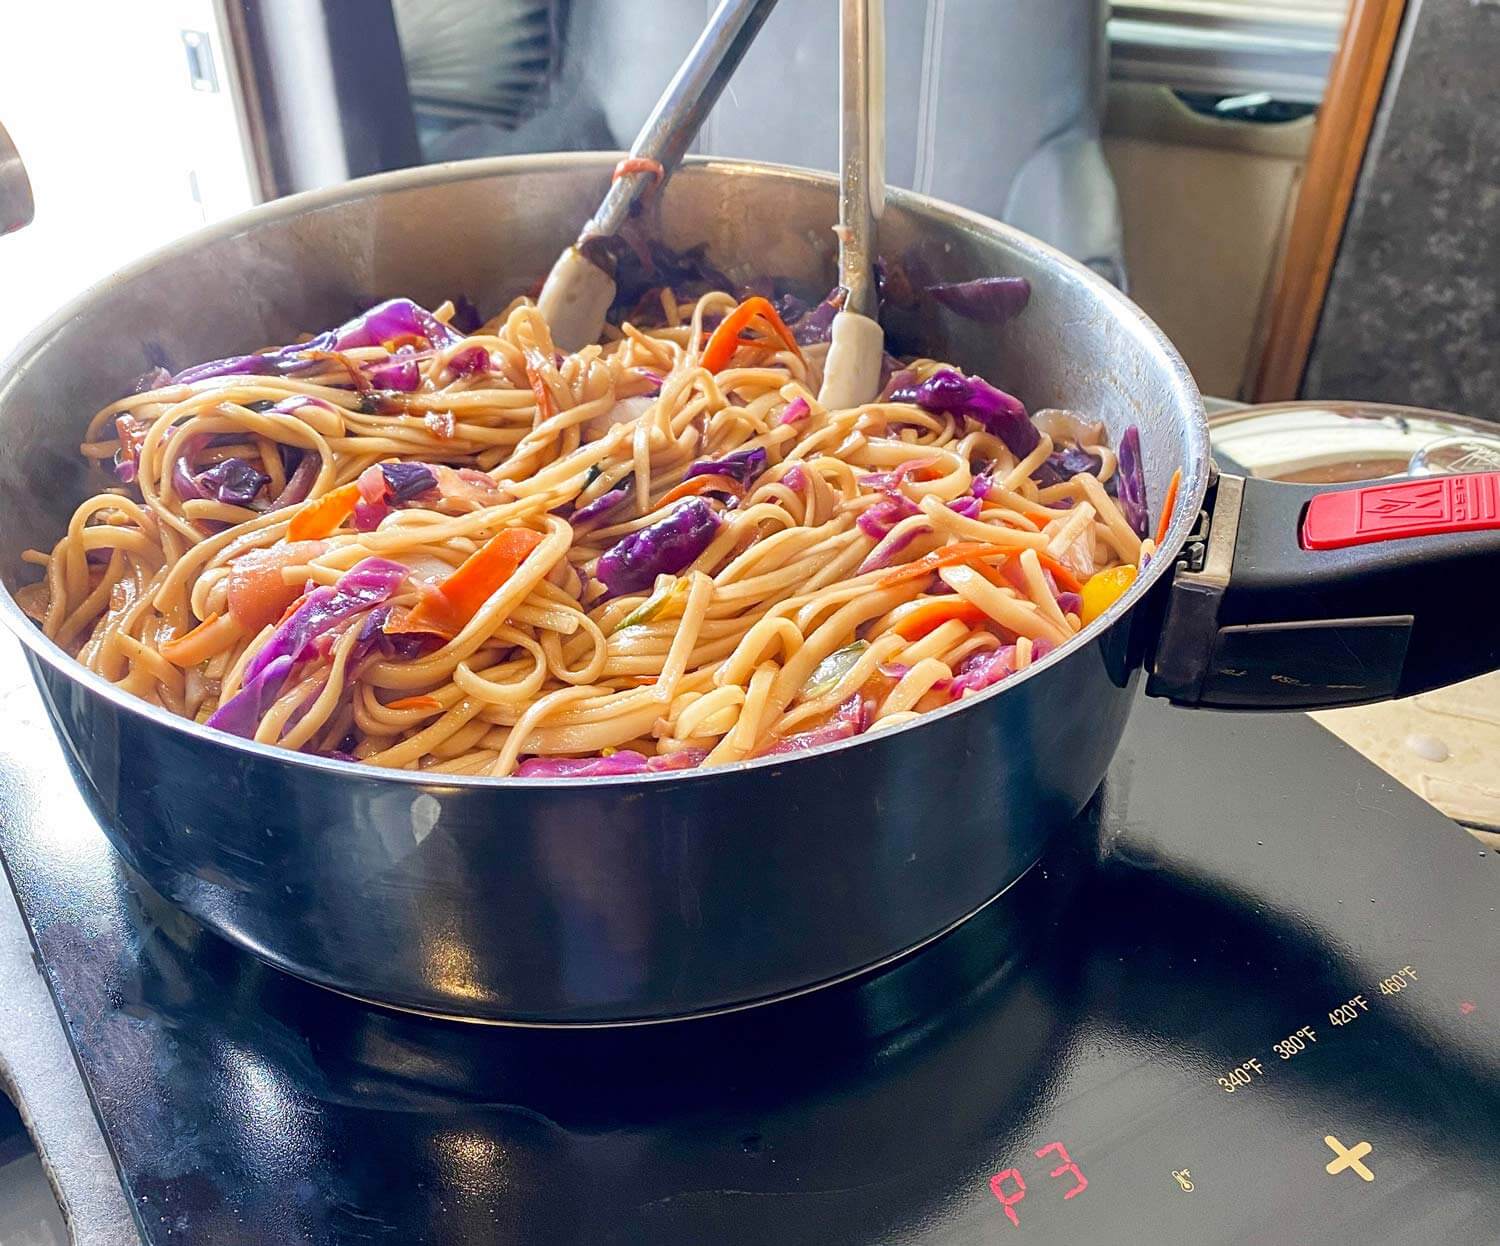 Magma skillet with stir-fried noodles on an induction plate in an RV kitchen.